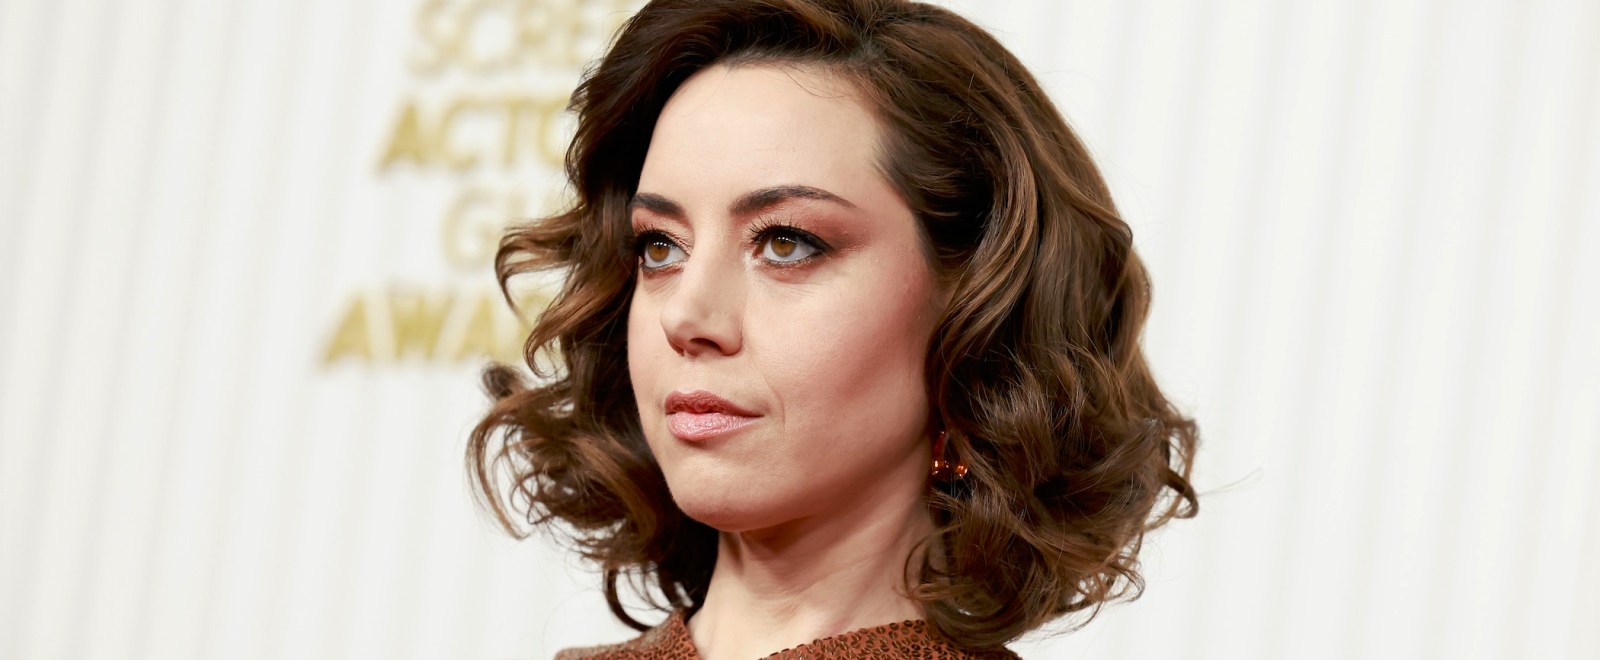 SAG Awards: Aubrey Plaza pictured with White Lotus co-stars after